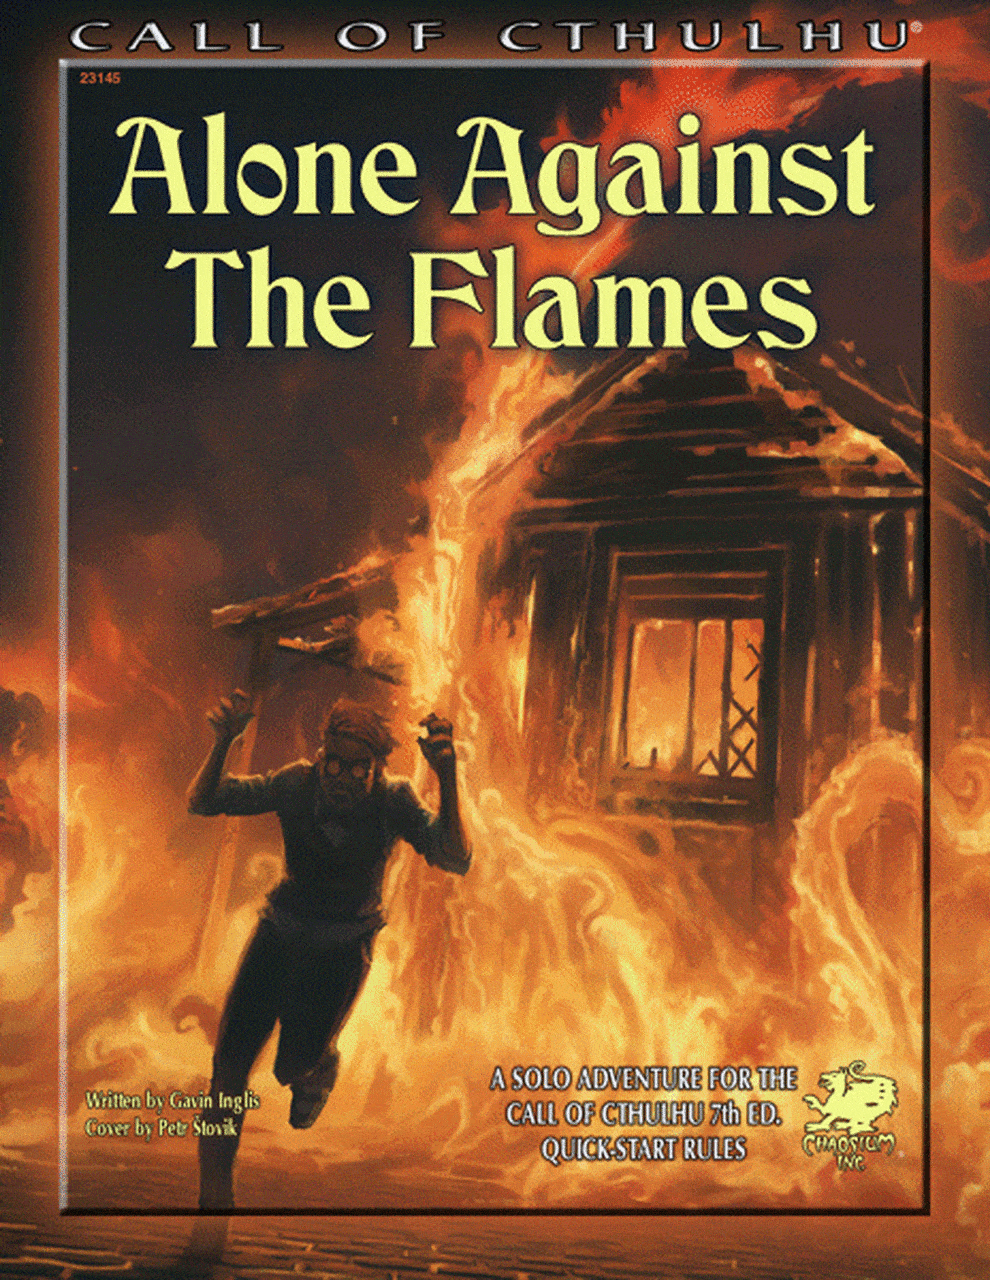 Call of Cthulhu: Alone Against the Flames RPG Chaosium 